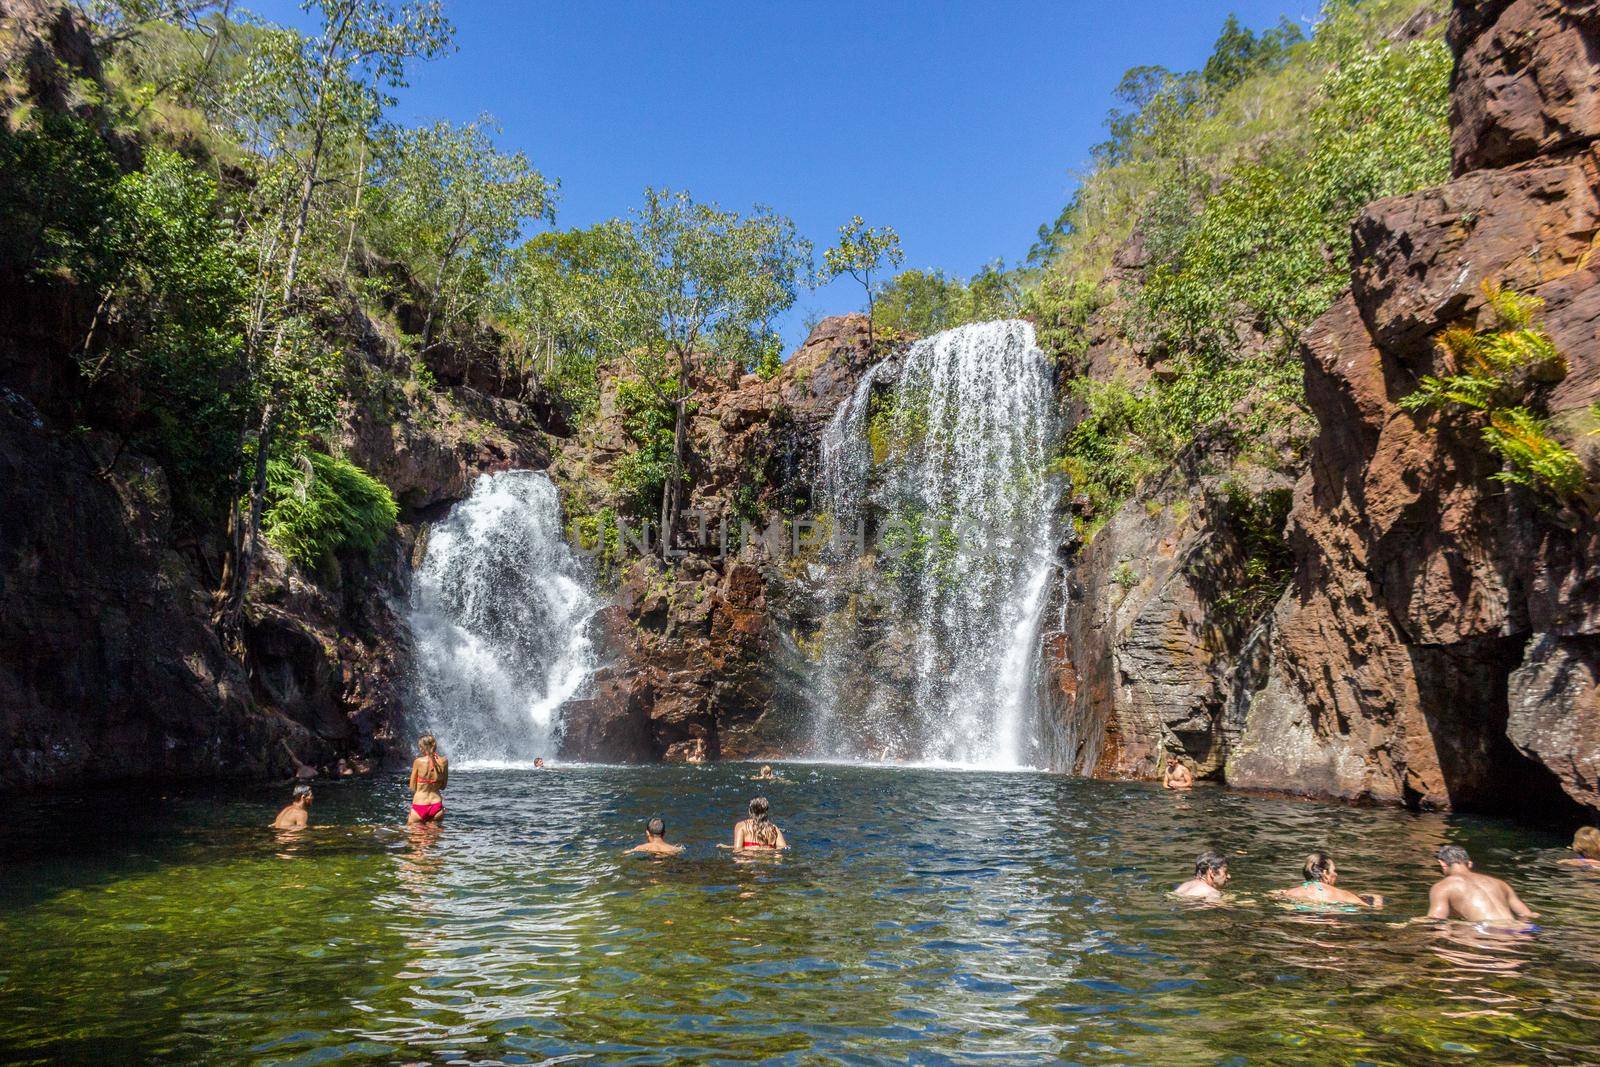 Tourists and residents enjoy refreshing swim at Florence Falls, very popular desitination for tourists and locals alike, Litchfield National Park, Northern Territory, Australia by bettercallcurry